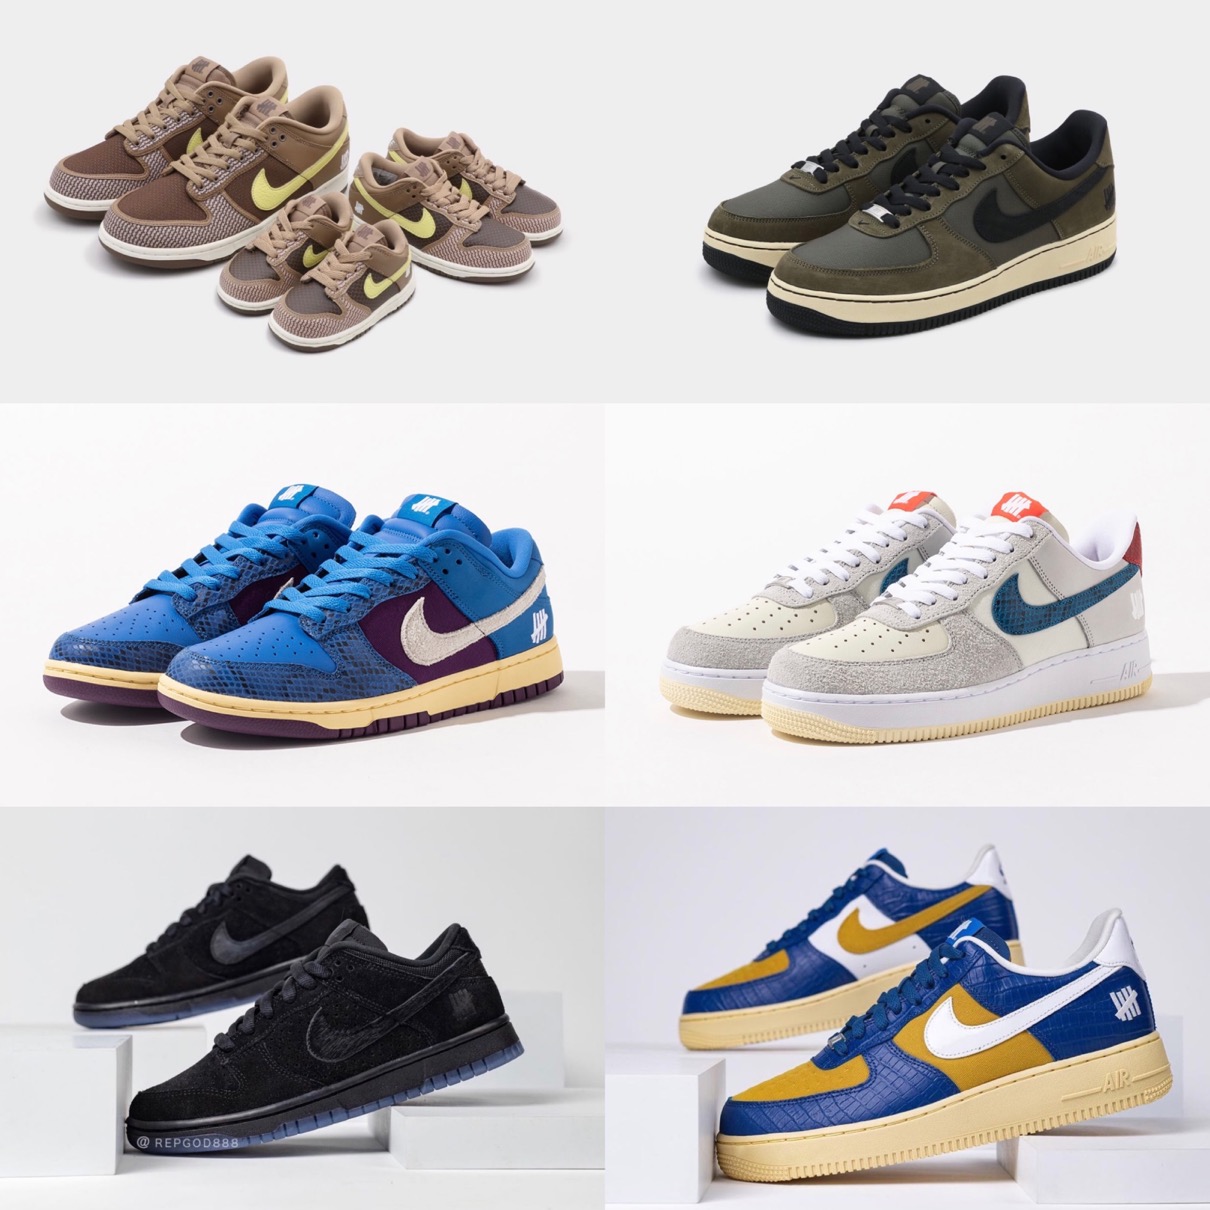 UNDEFEATED × Nike】Air Force 1  Dunk Low SP “5 On It” Pack  第3弾が国内9月9日/9月22日に発売予定 | UP TO DATE